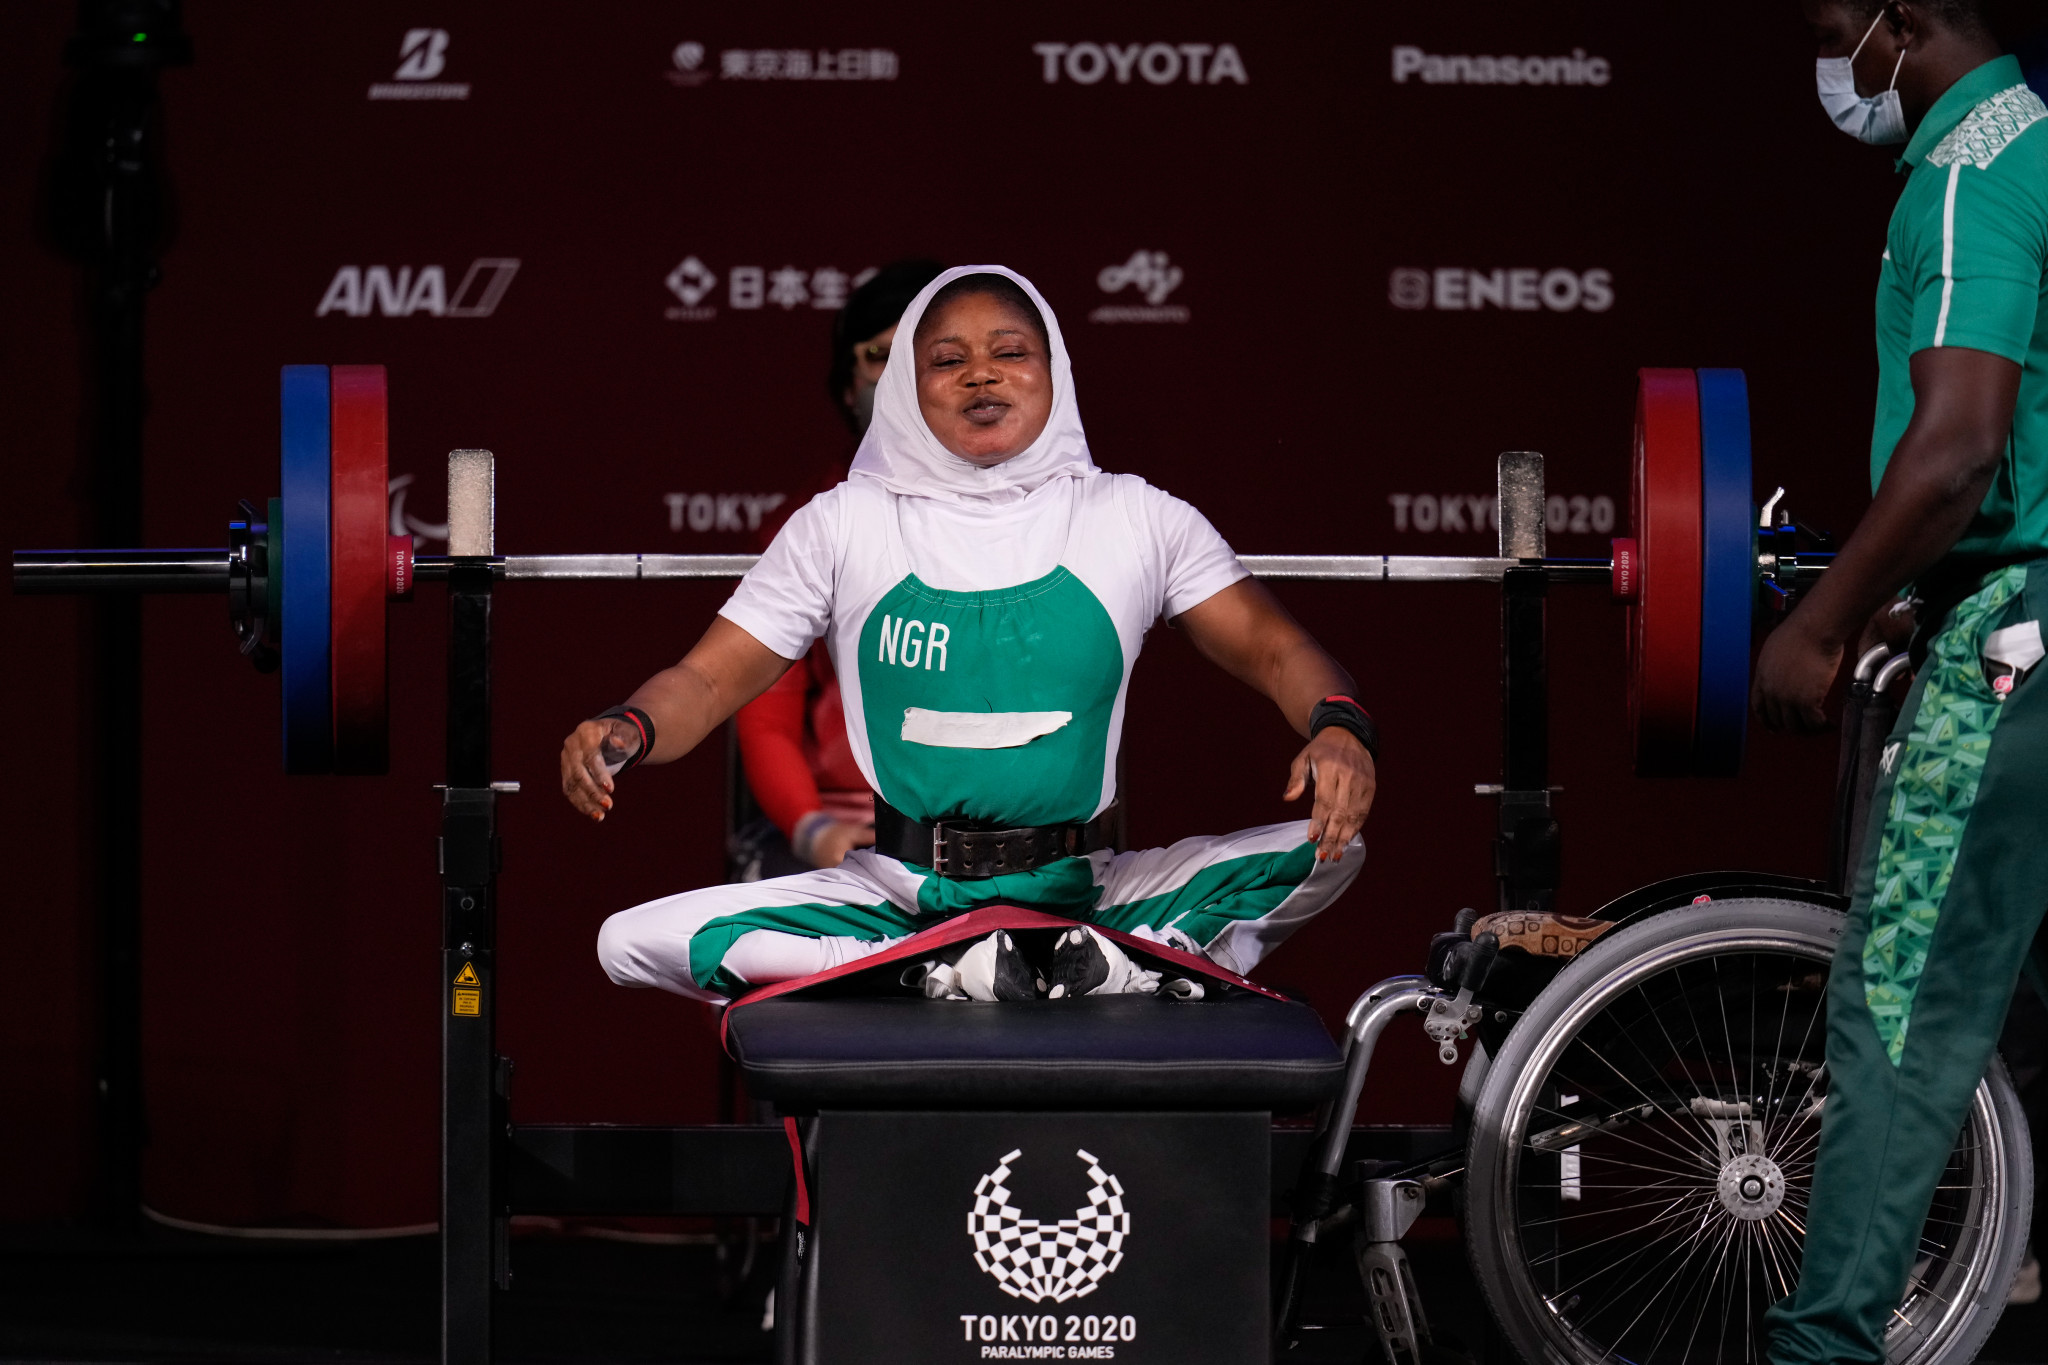 Nigeria's Latifat Tijani won women's 45kg gold at the Tokyo 2020 Paralympics ©Getty Images